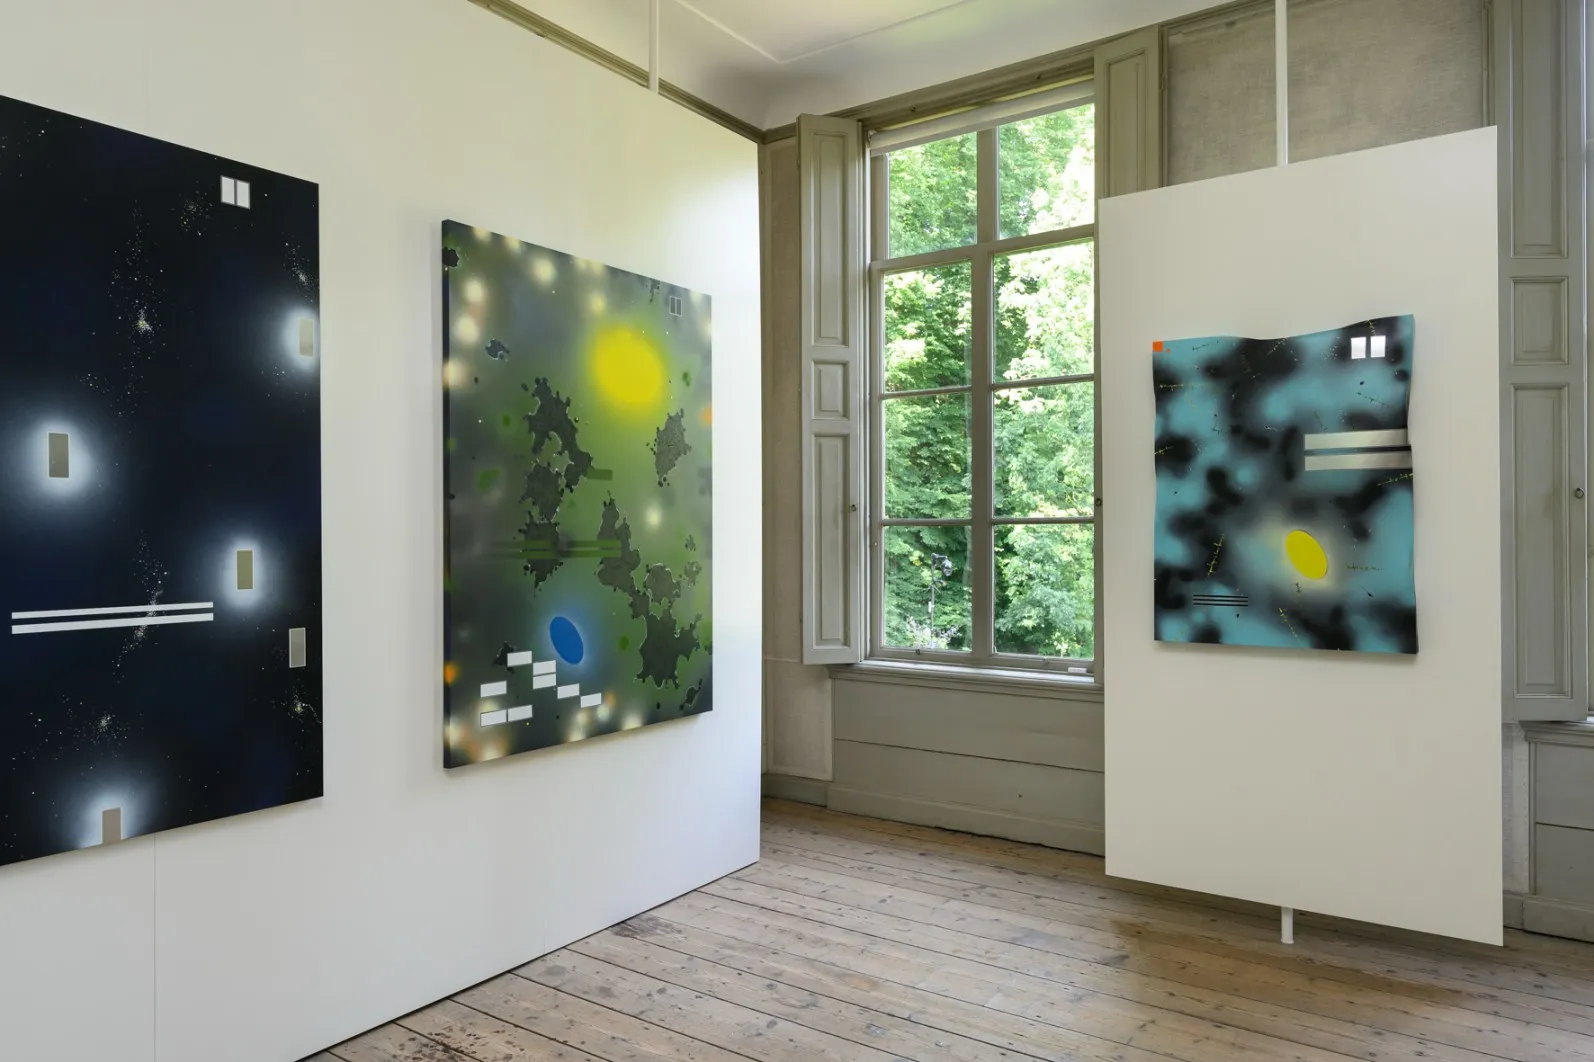 Three abstract artworks bathed in natural light beside a window, where trees peek through, within the exhibition space